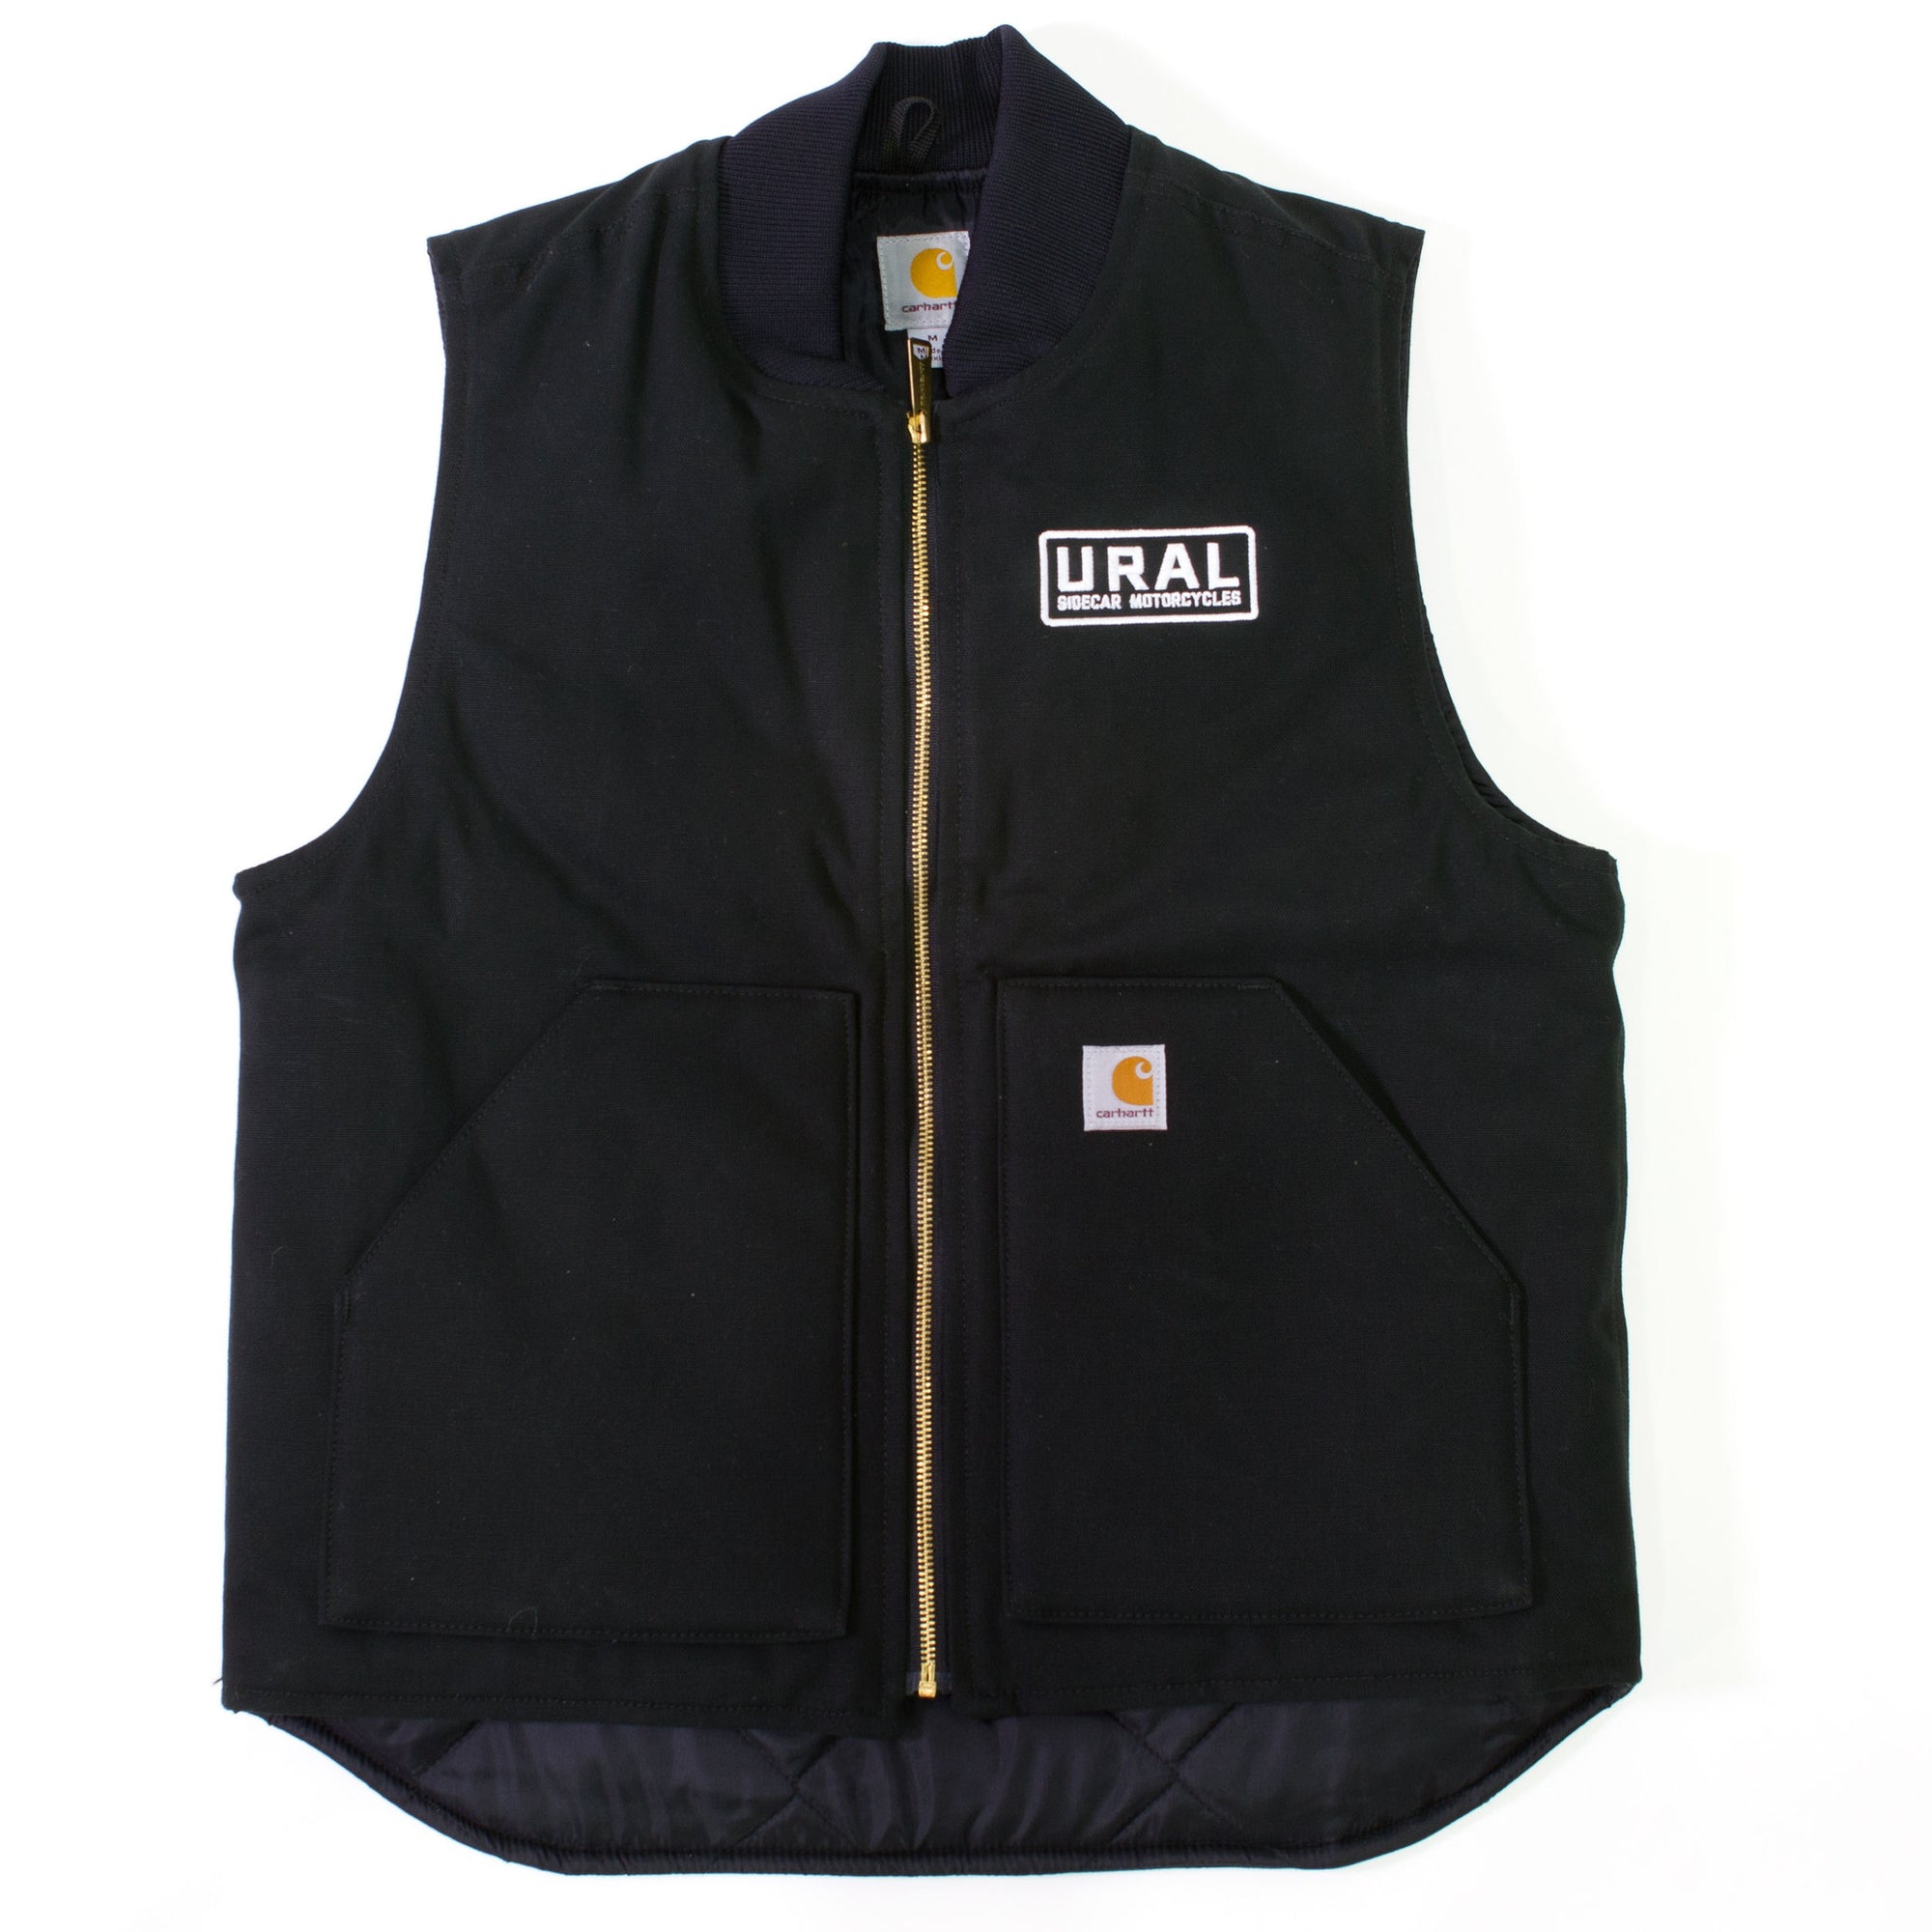 Limited Quantity Available! - Ural Carhartt Vest